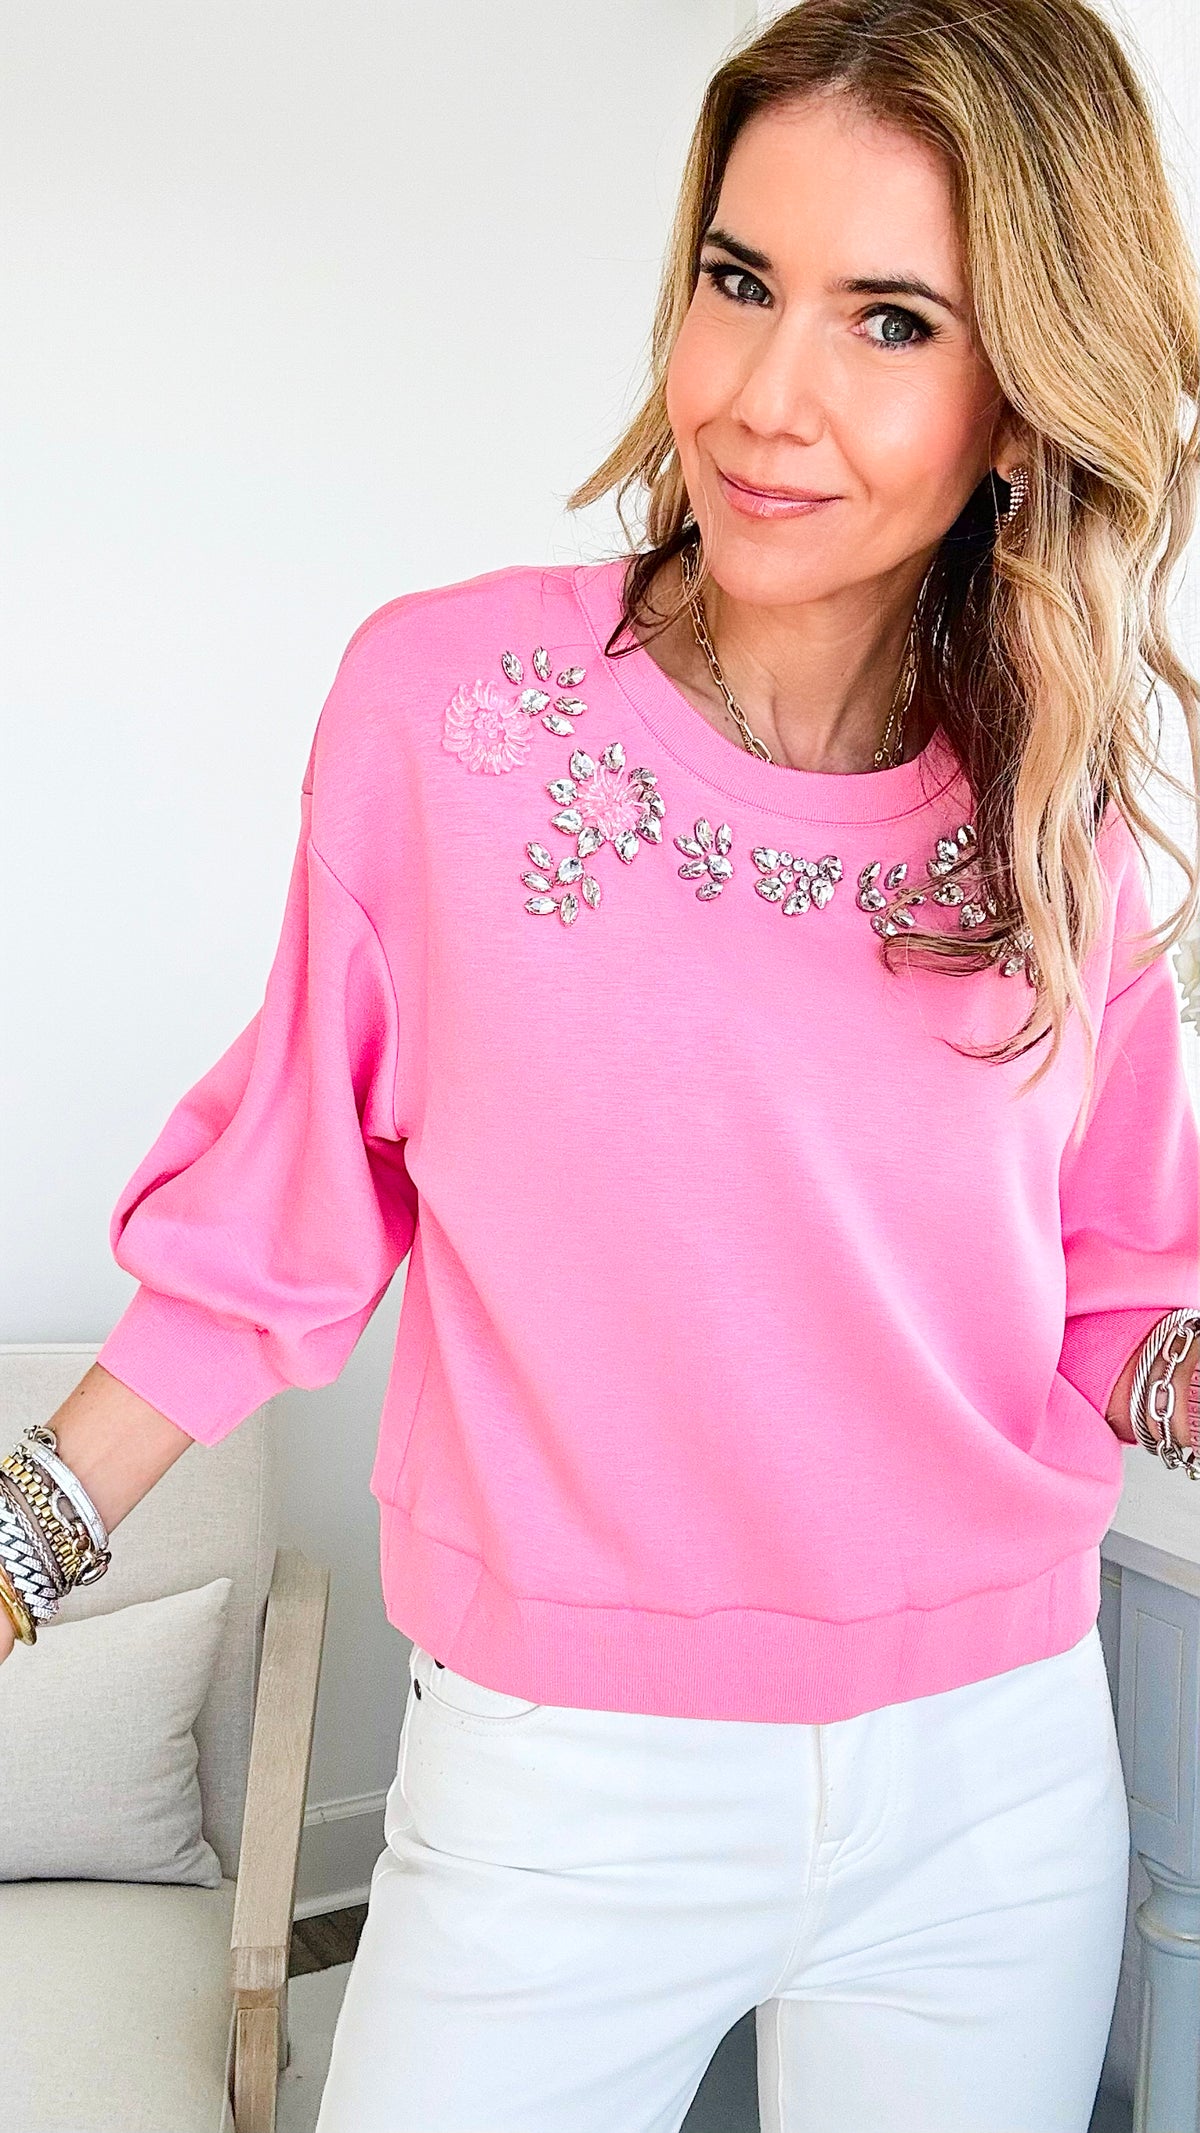 Rhinestone Detail Round Neck Sweatshirt - Pink-130 Long Sleeve Tops-pastel design-Coastal Bloom Boutique, find the trendiest versions of the popular styles and looks Located in Indialantic, FL